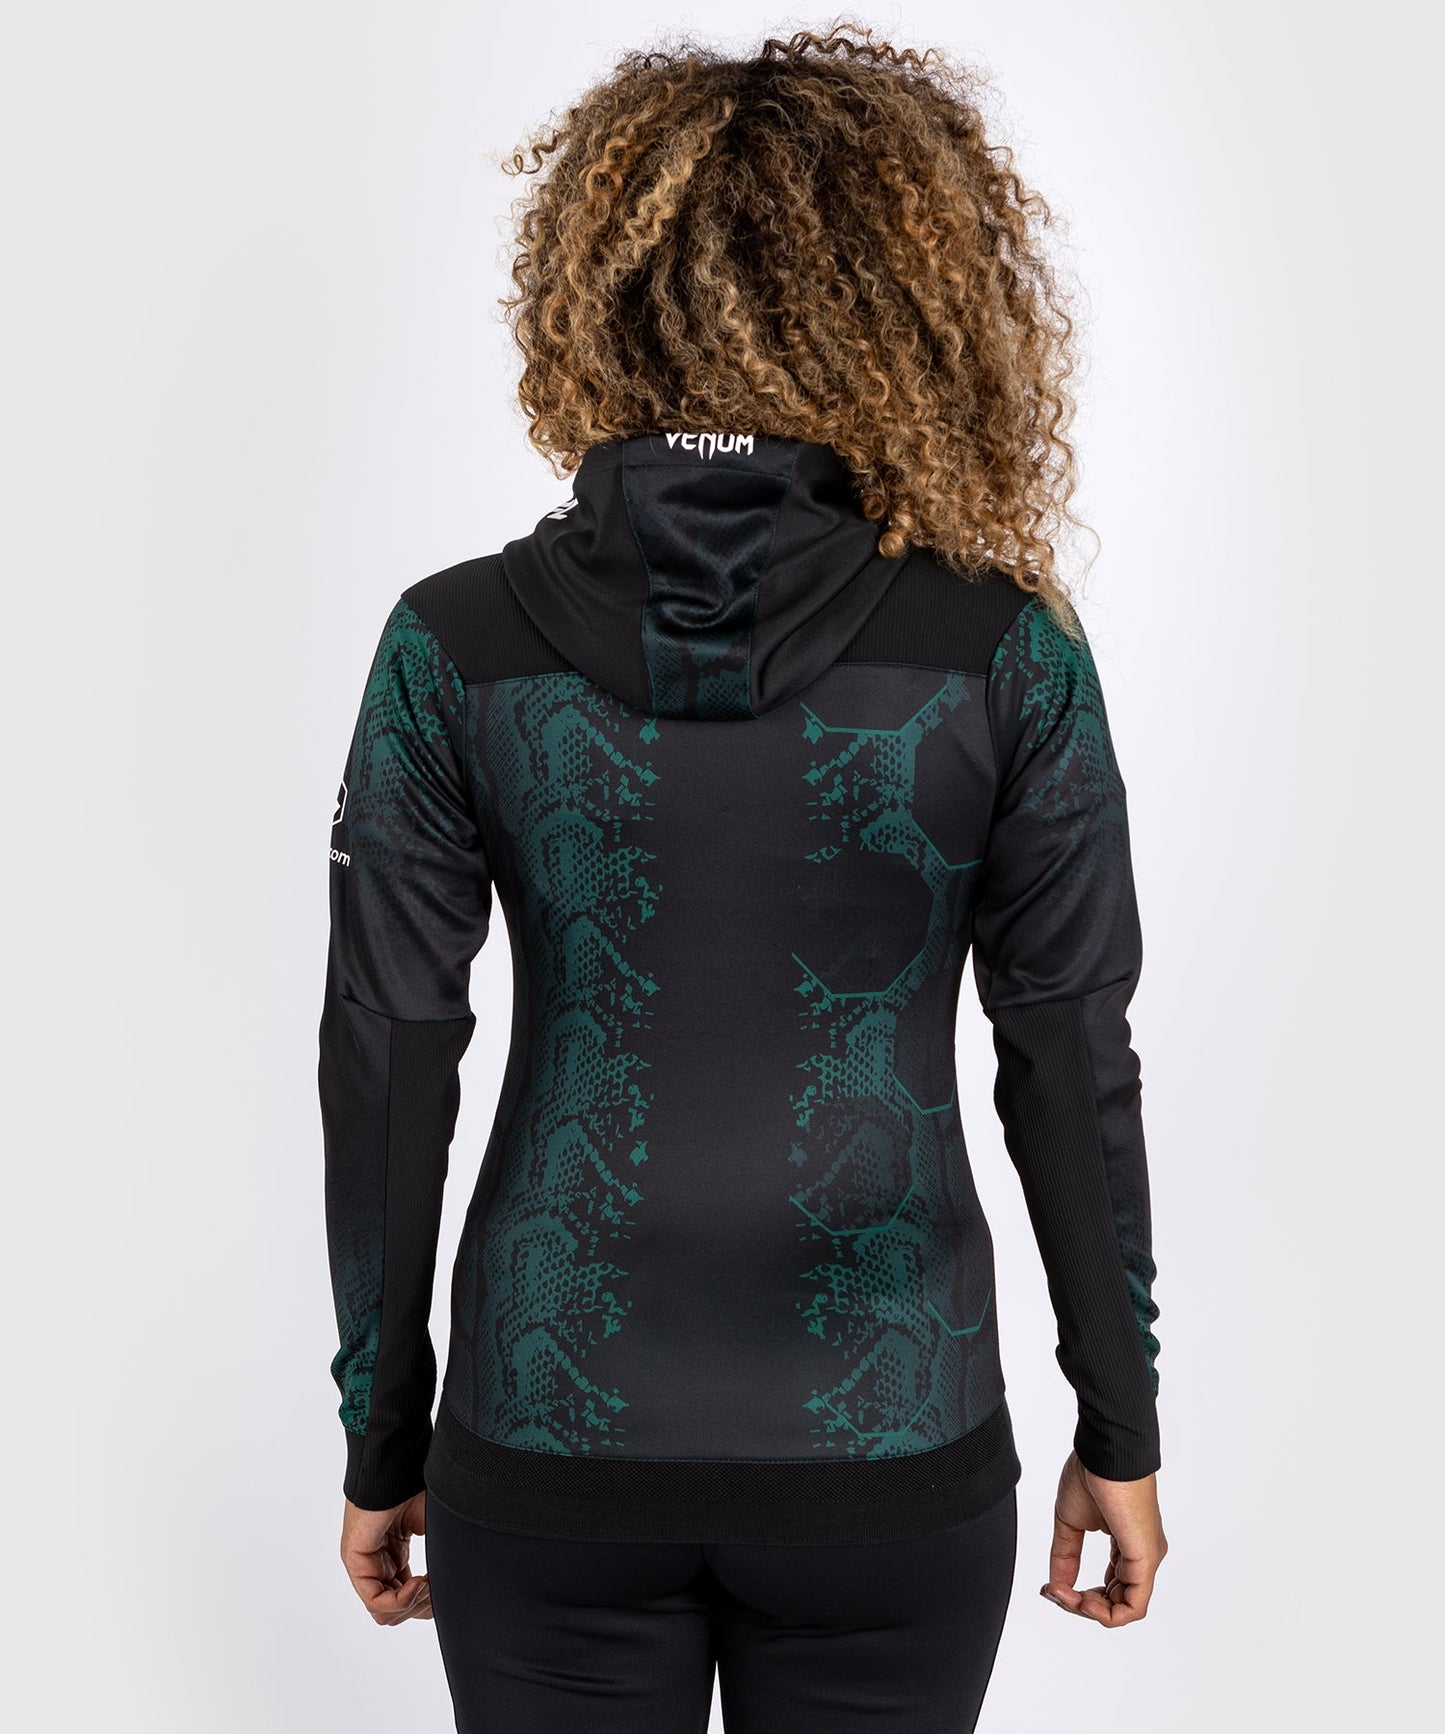 UFC Adrenaline by Venum Personalized Authentic Fight Night Sudadera con capucha Walkout para mujer - Emerald Edition - Verde/Negro